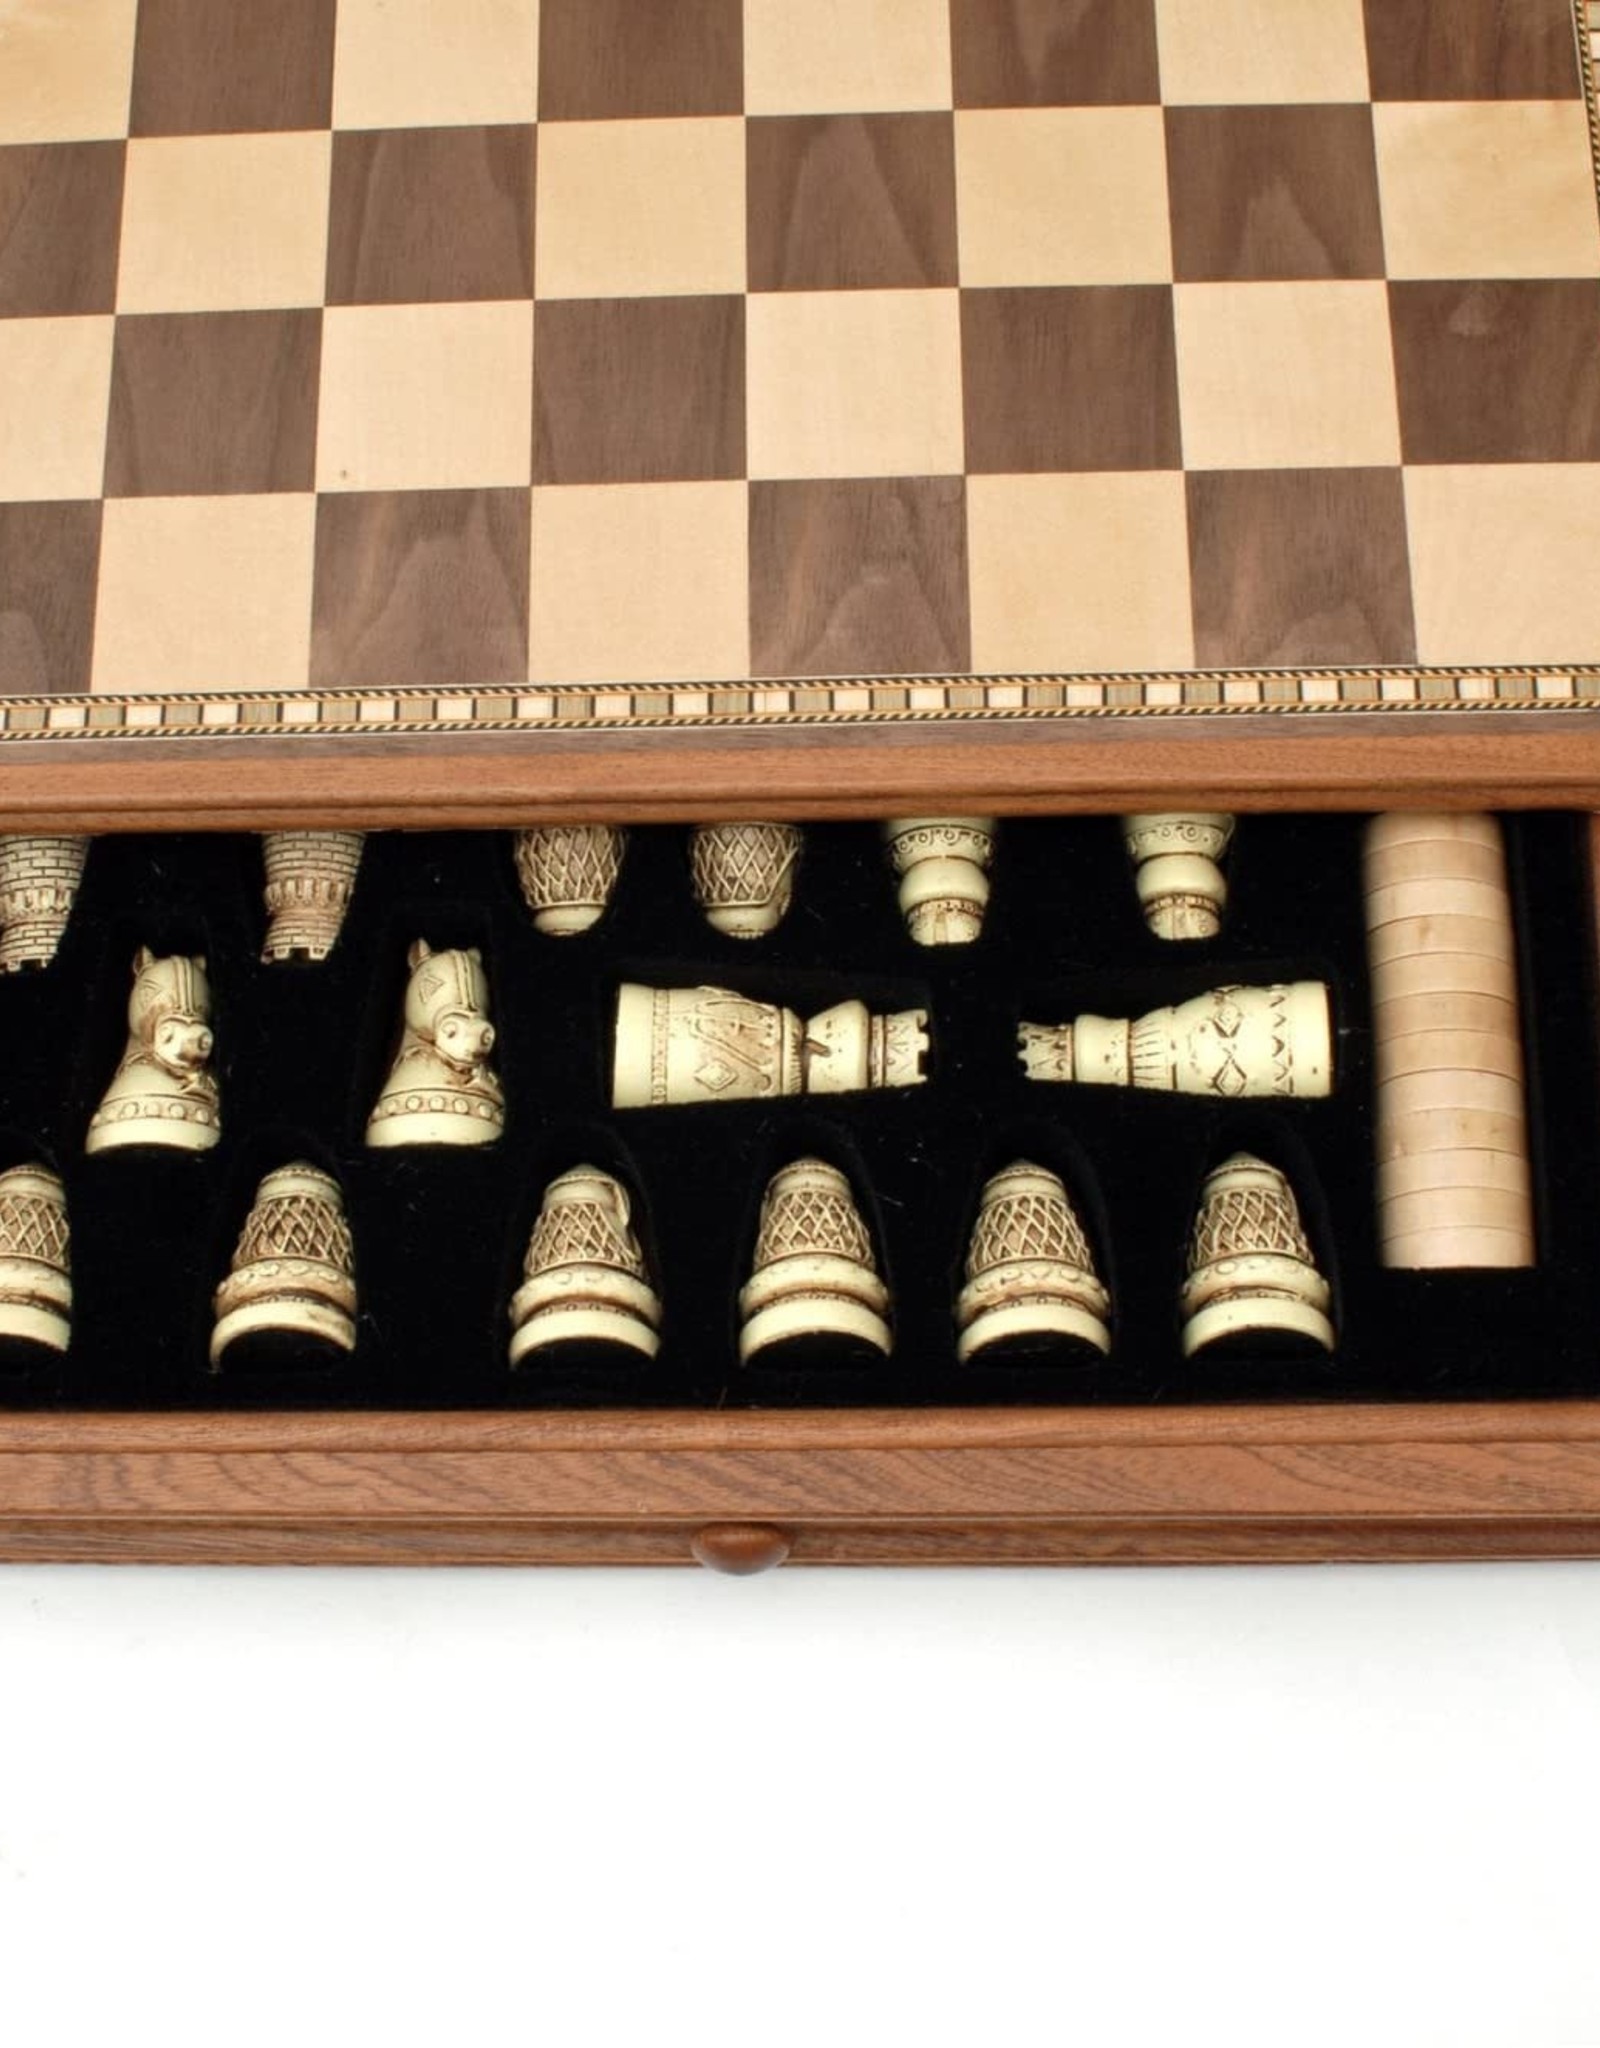 Medieval Chess Set: Wooden Board with Drawers 15 Inch